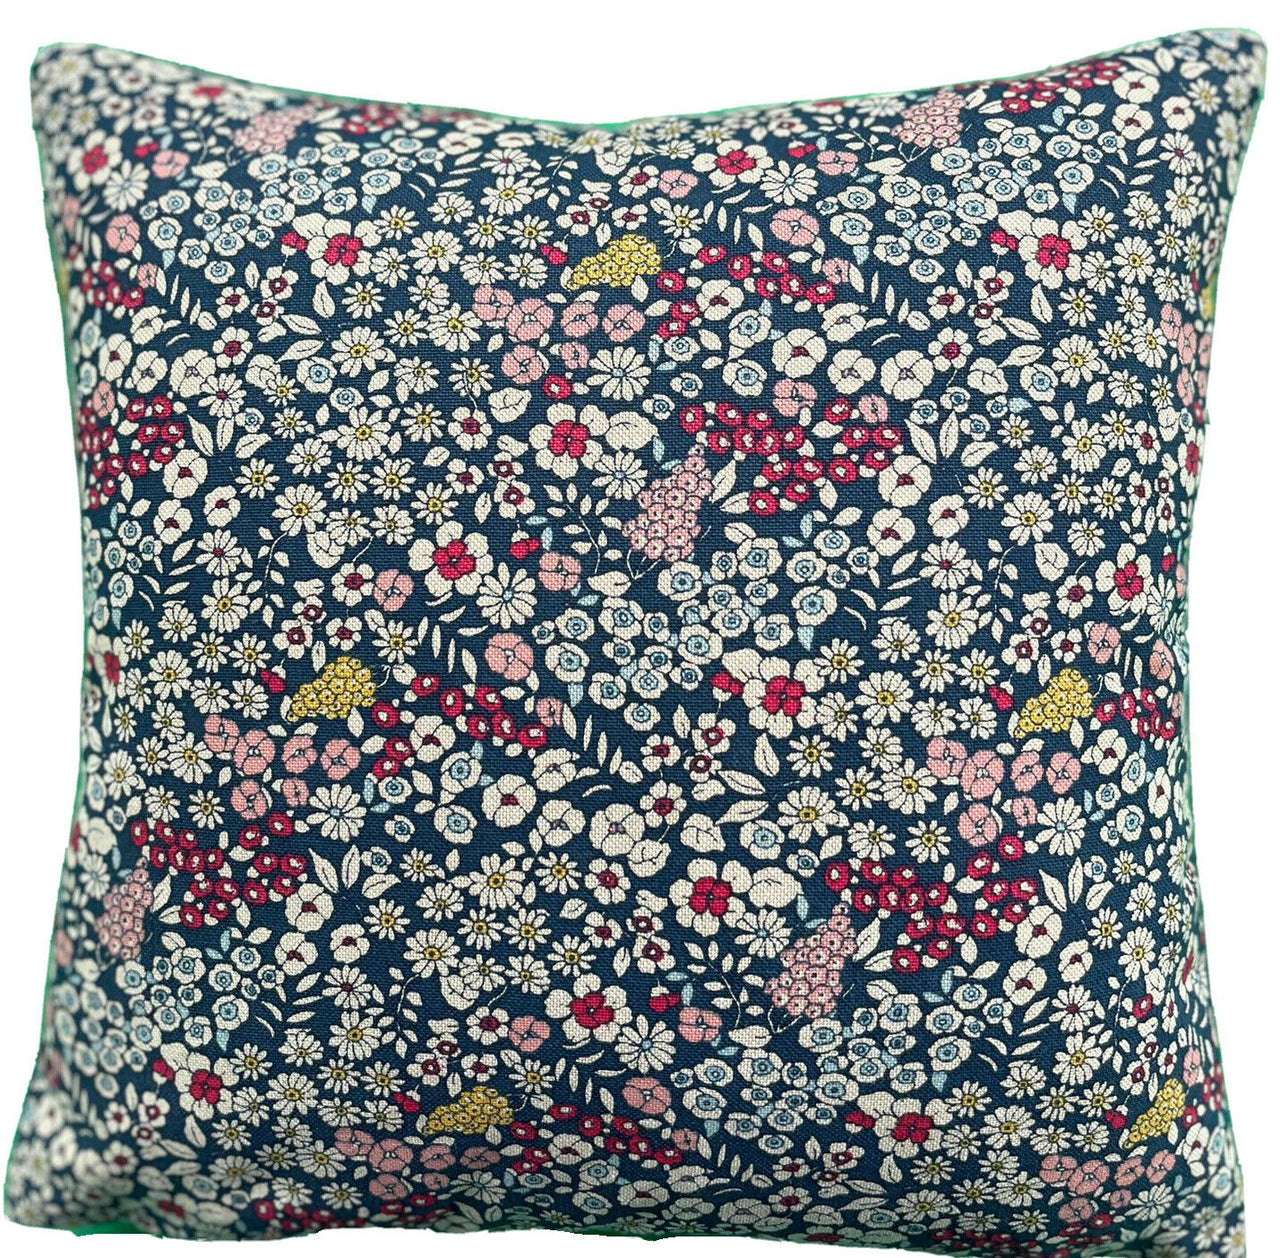 Ditsy Floral Decorative Throw pillow Case Midnight Blossom Small Flowers Cushion Cover Blue Sofa Décor